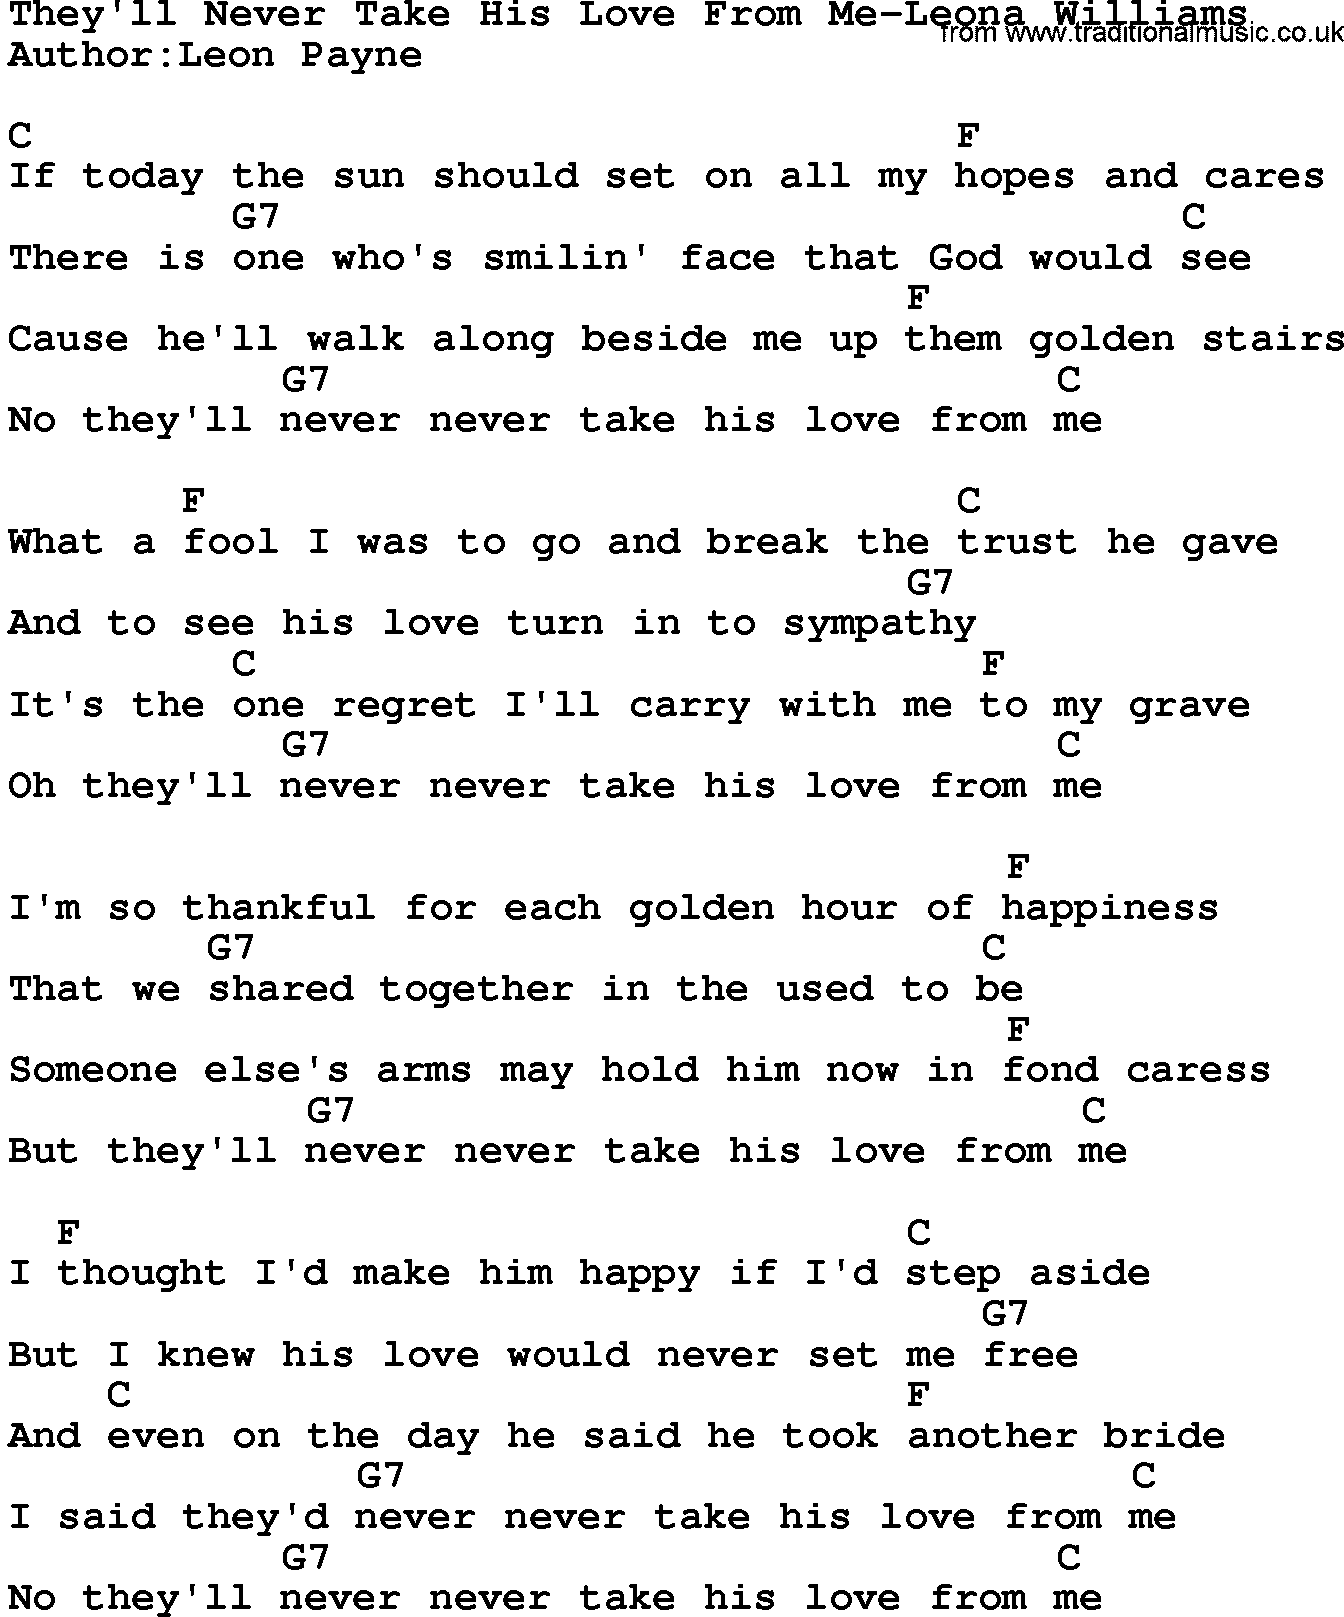 Country music song: They'll Never Take His Love From Me-Leona Williams lyrics and chords